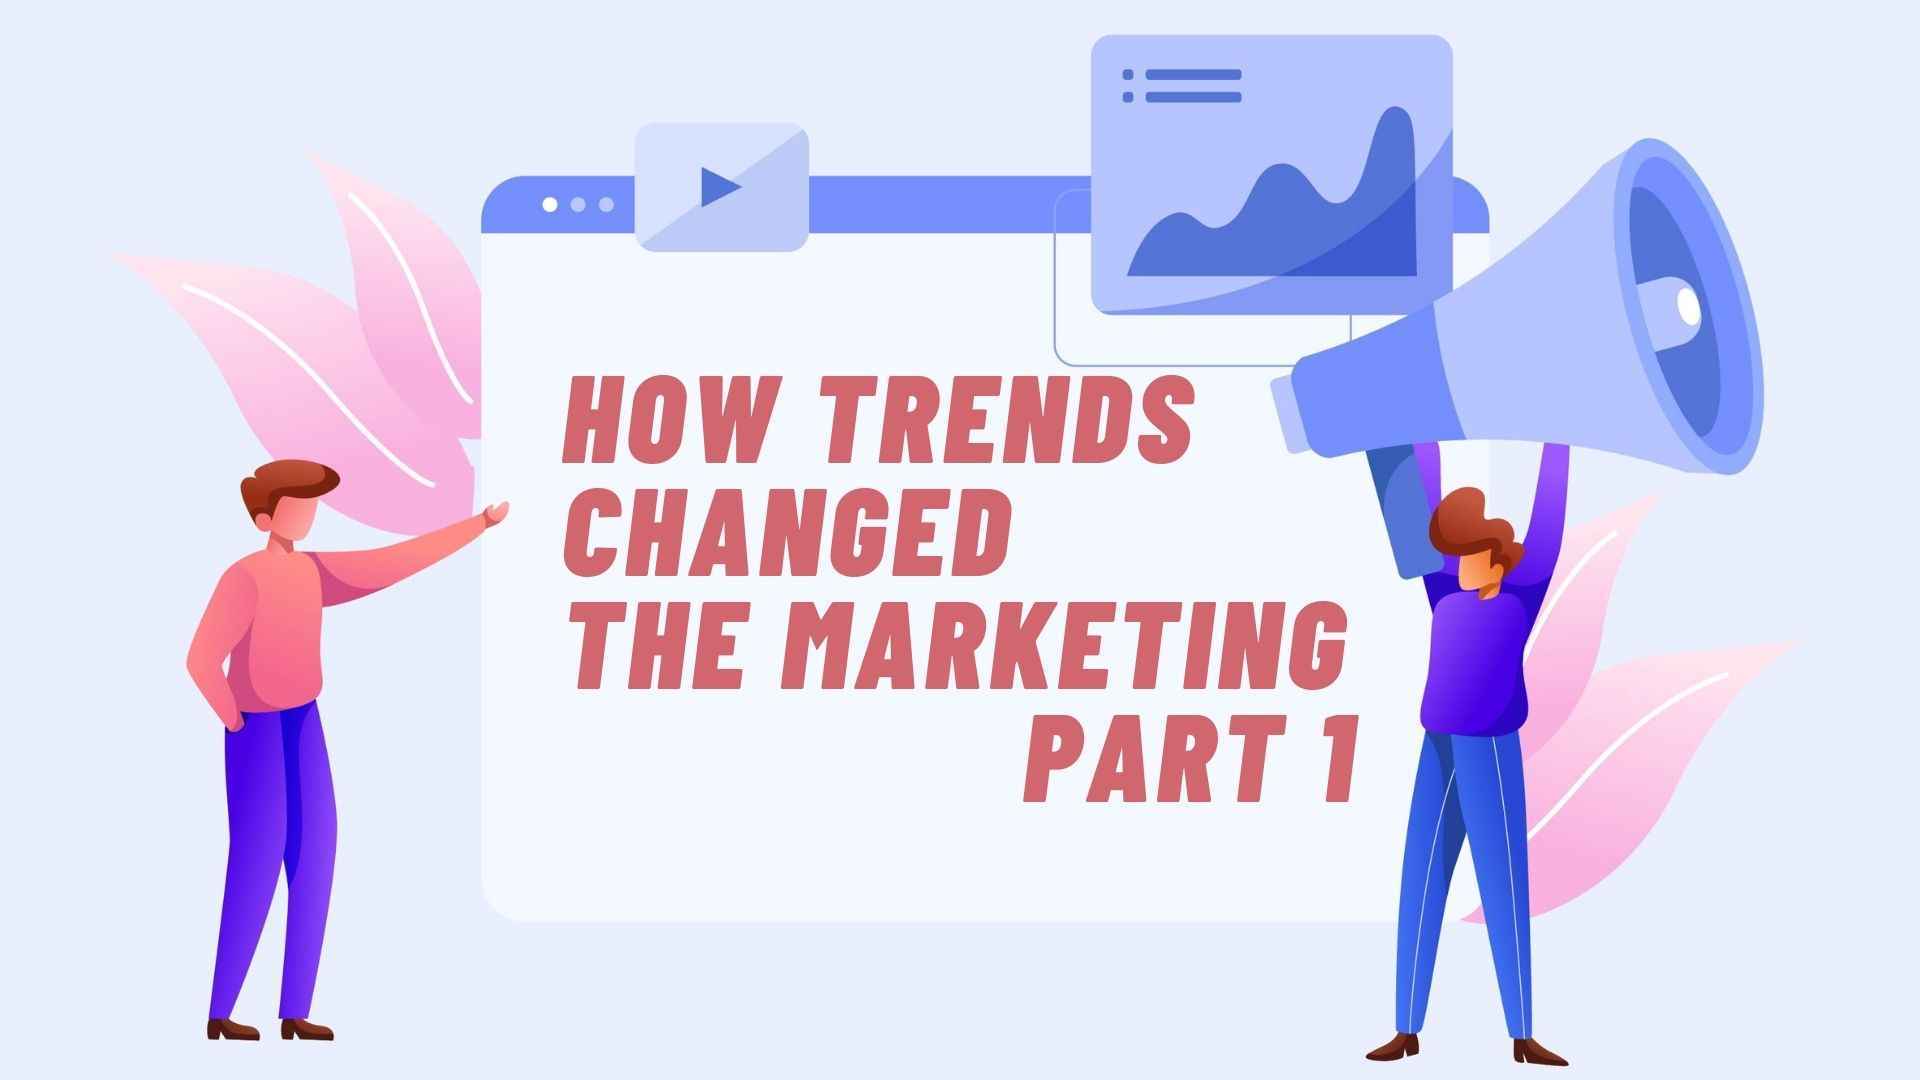 How trends changed the marketing